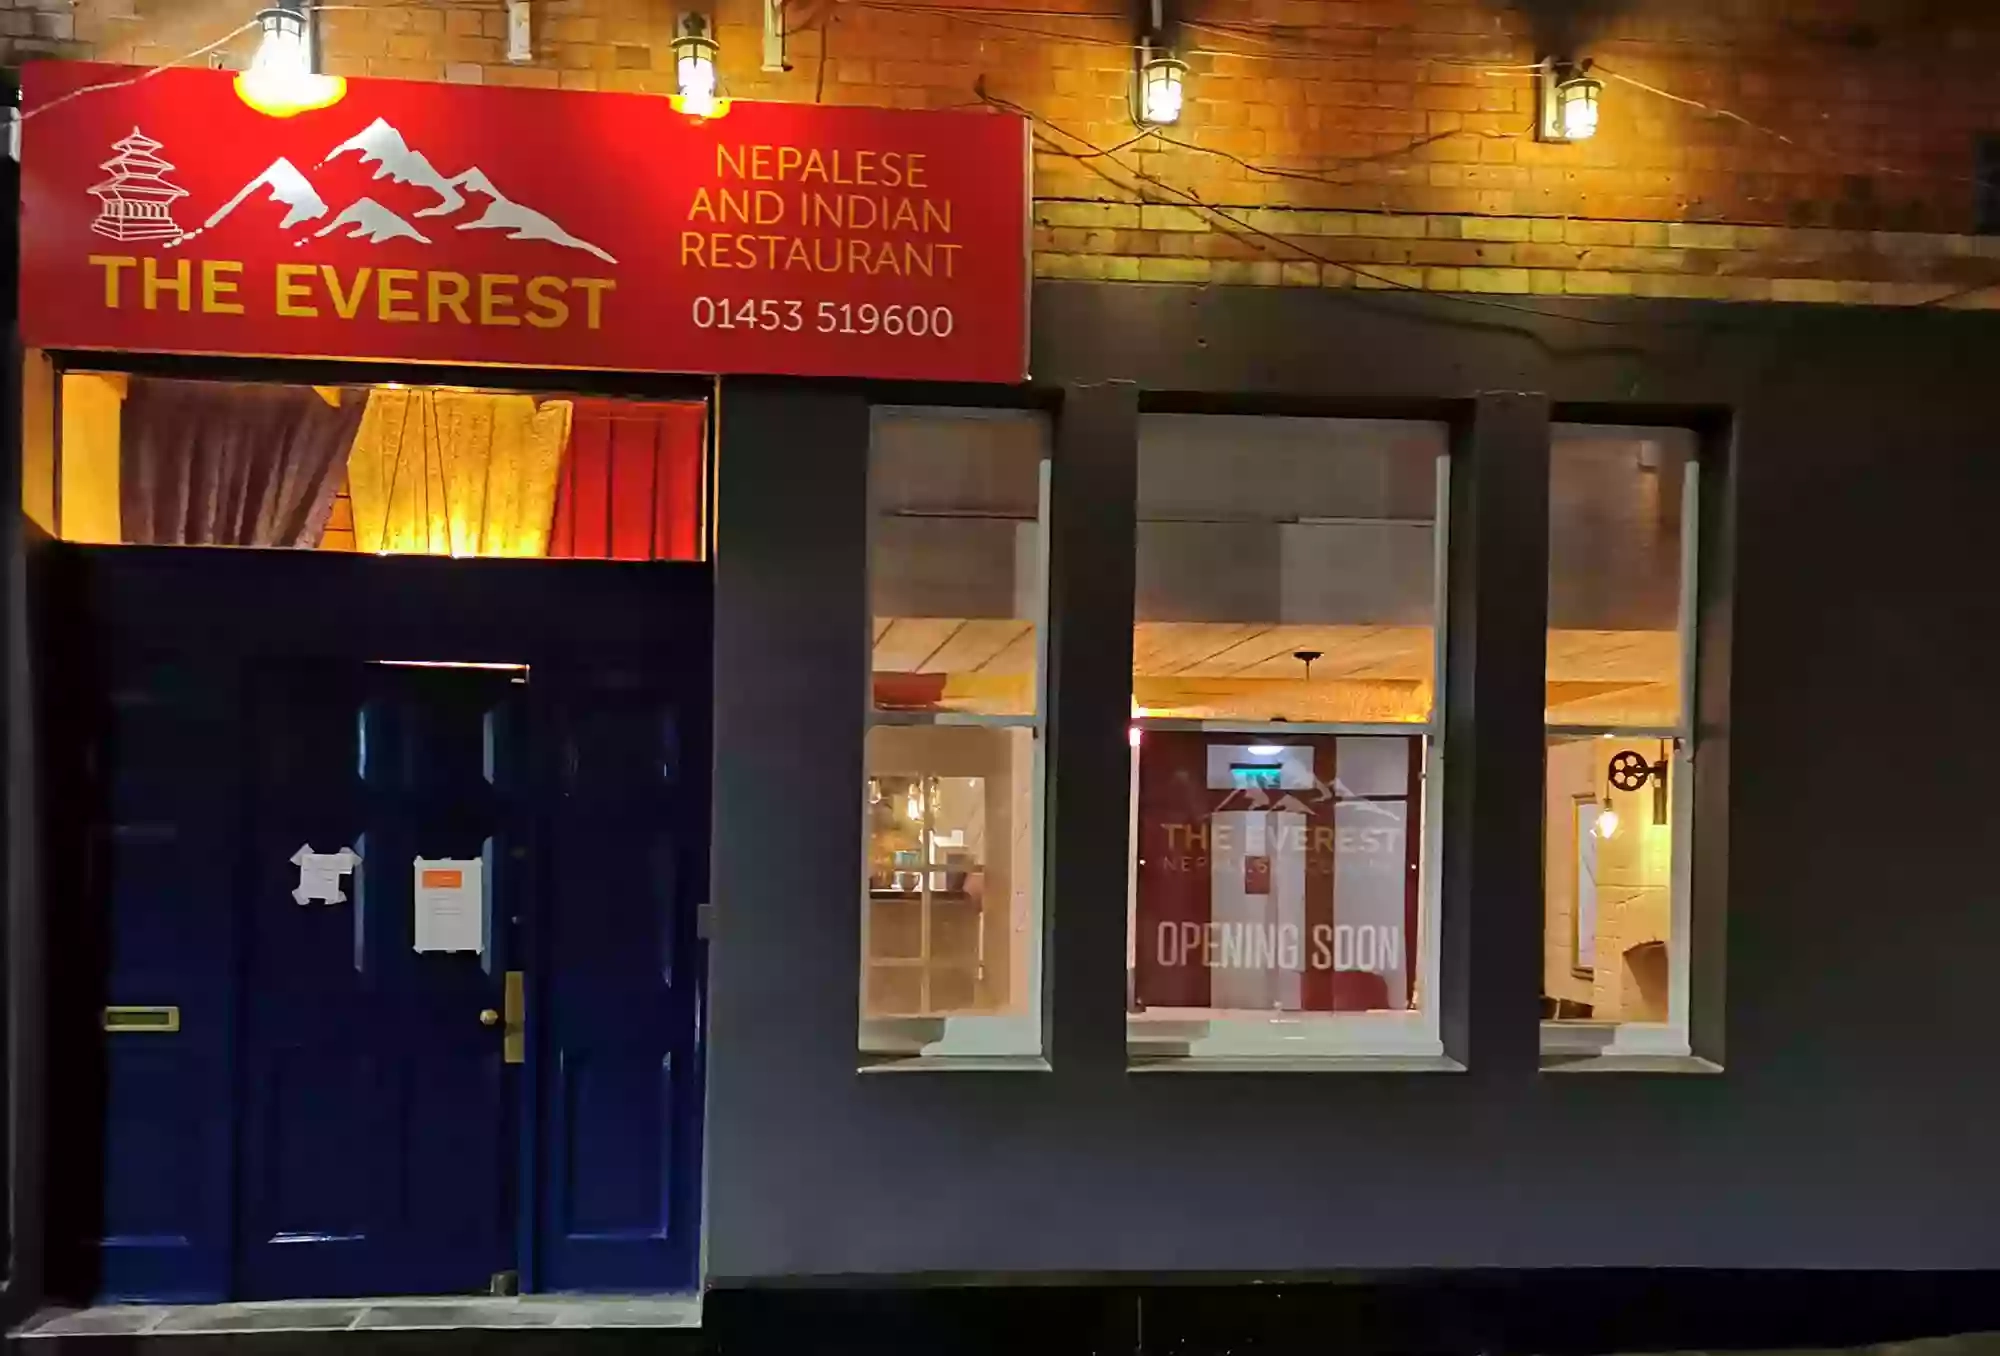 The Everest Nepalese & Indian Restaurant